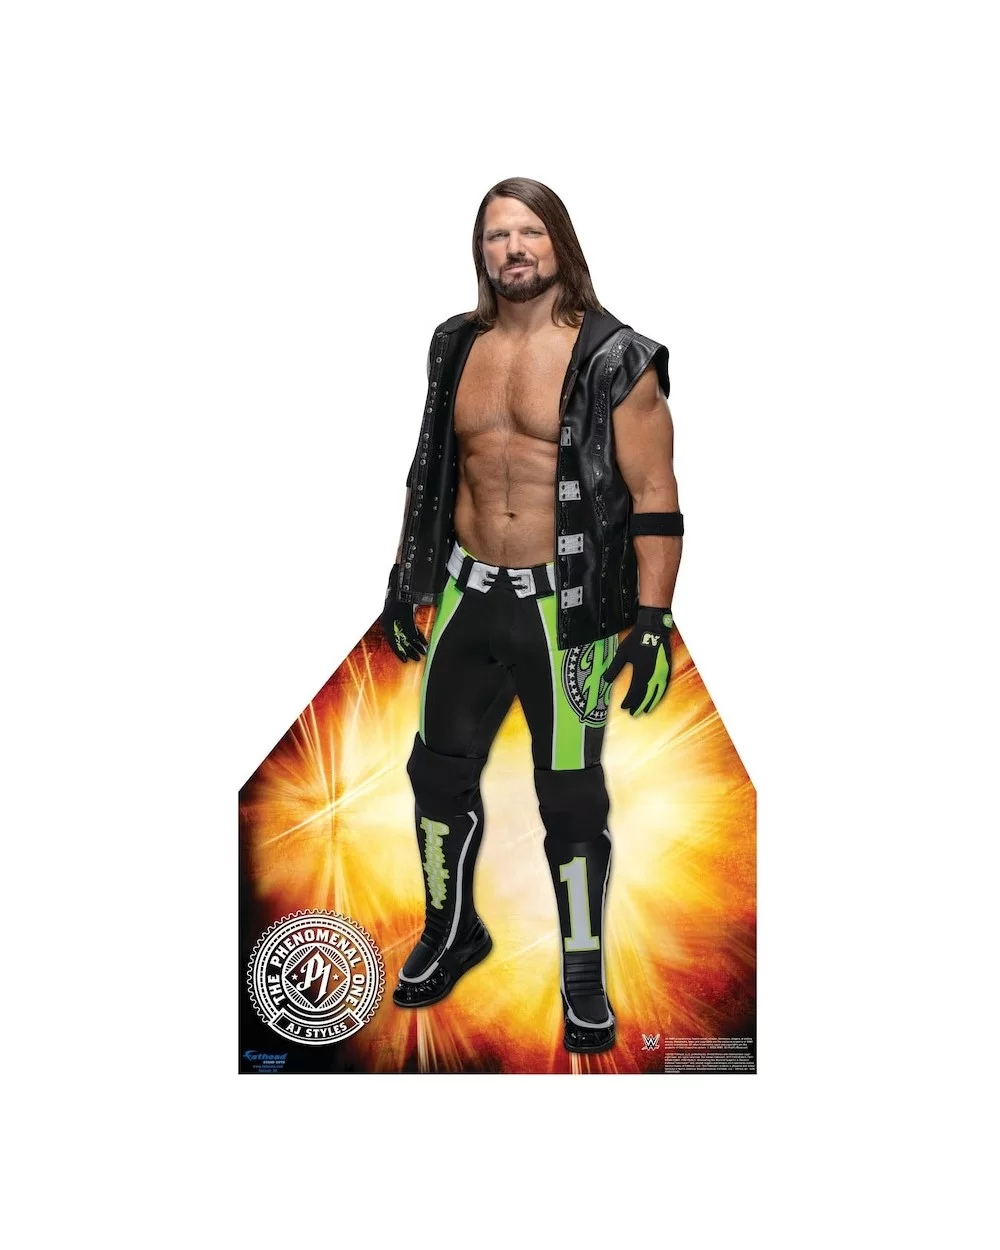 Fathead AJ Styles Life-Size Foam Core Stand Out $40.32 Home & Office